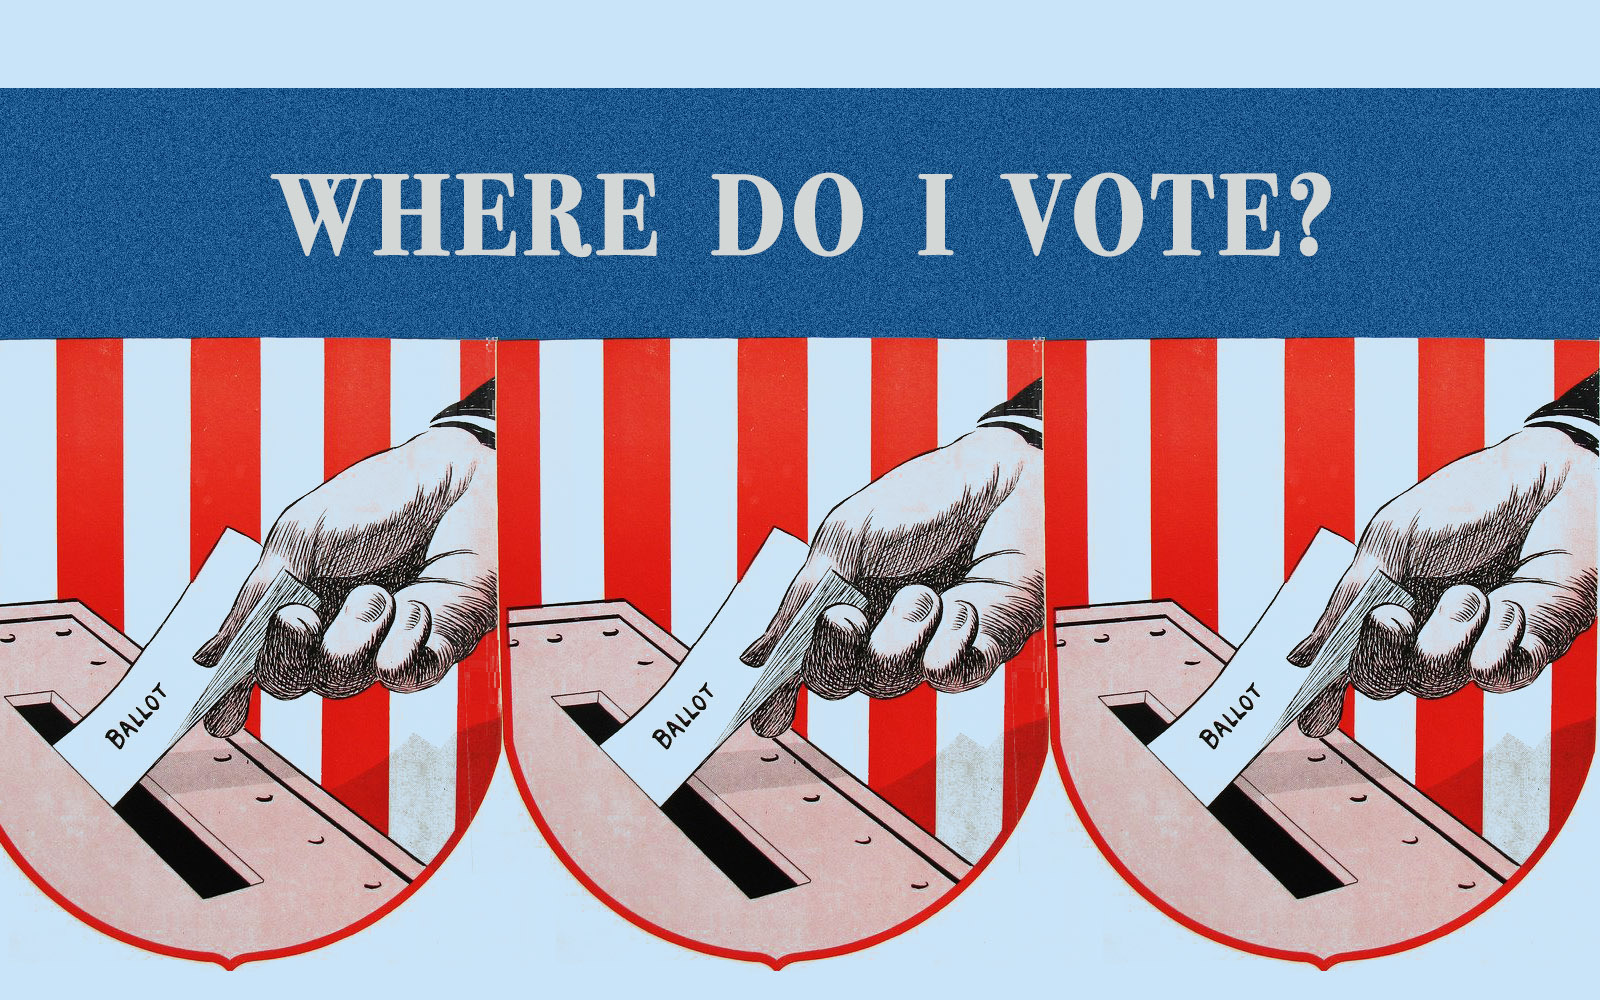 Where Do You Vote on Election Day? It’s Hard to Know. Here’s a Guide.